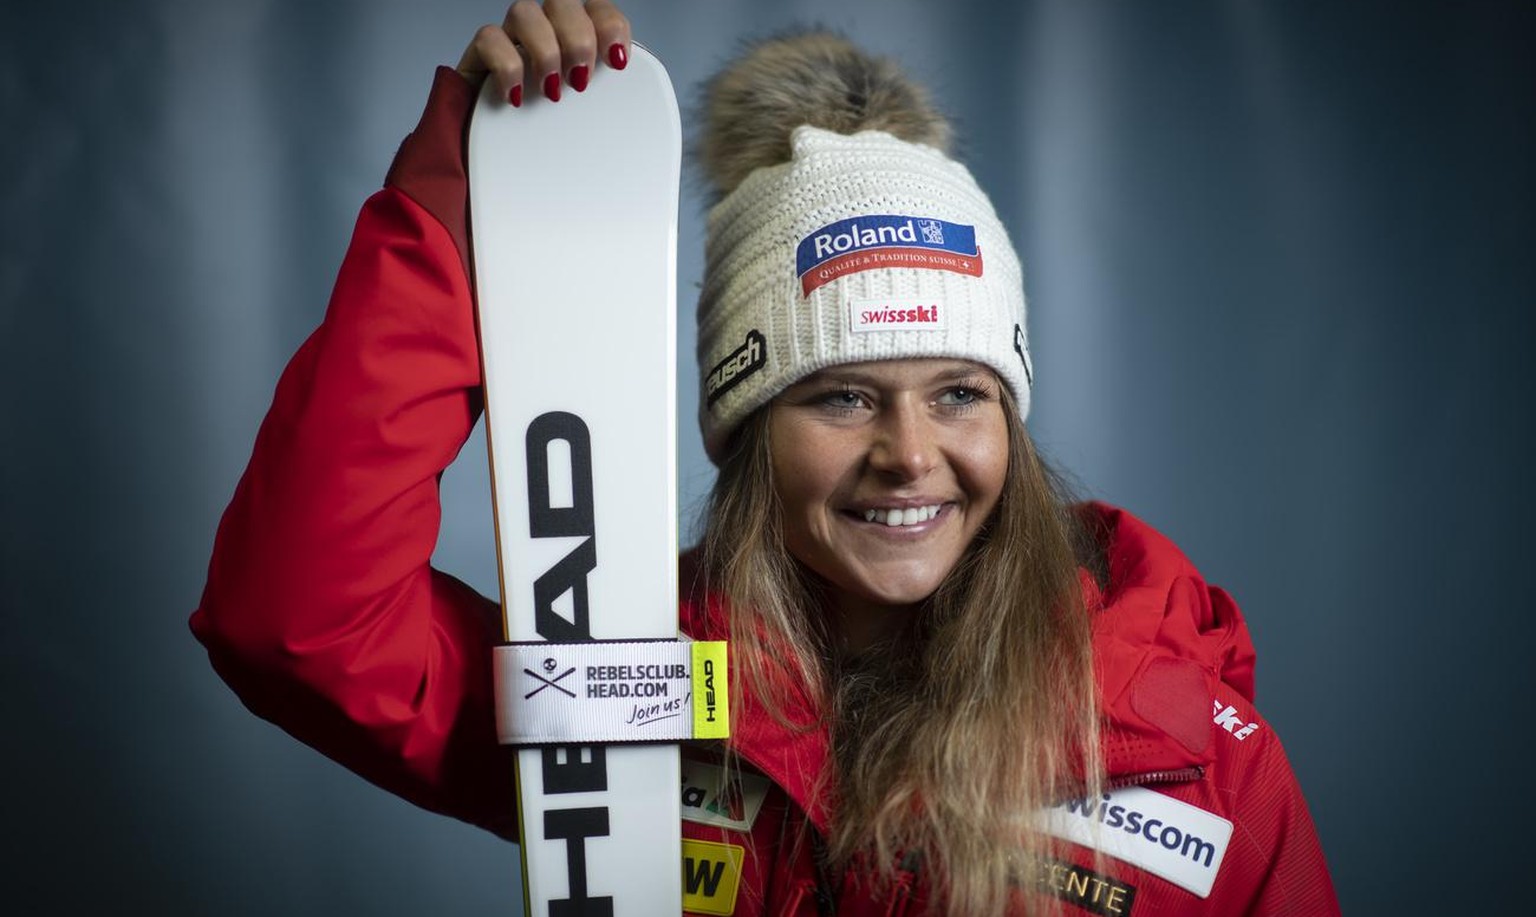 Corinne Suter of Switzerland, pictured at a press event in an underground parking lot at the FIS Alpine Ski World Cup season in Soelden, Austria, on Friday, October 16, 2020. The Alpine Skiing World C ...